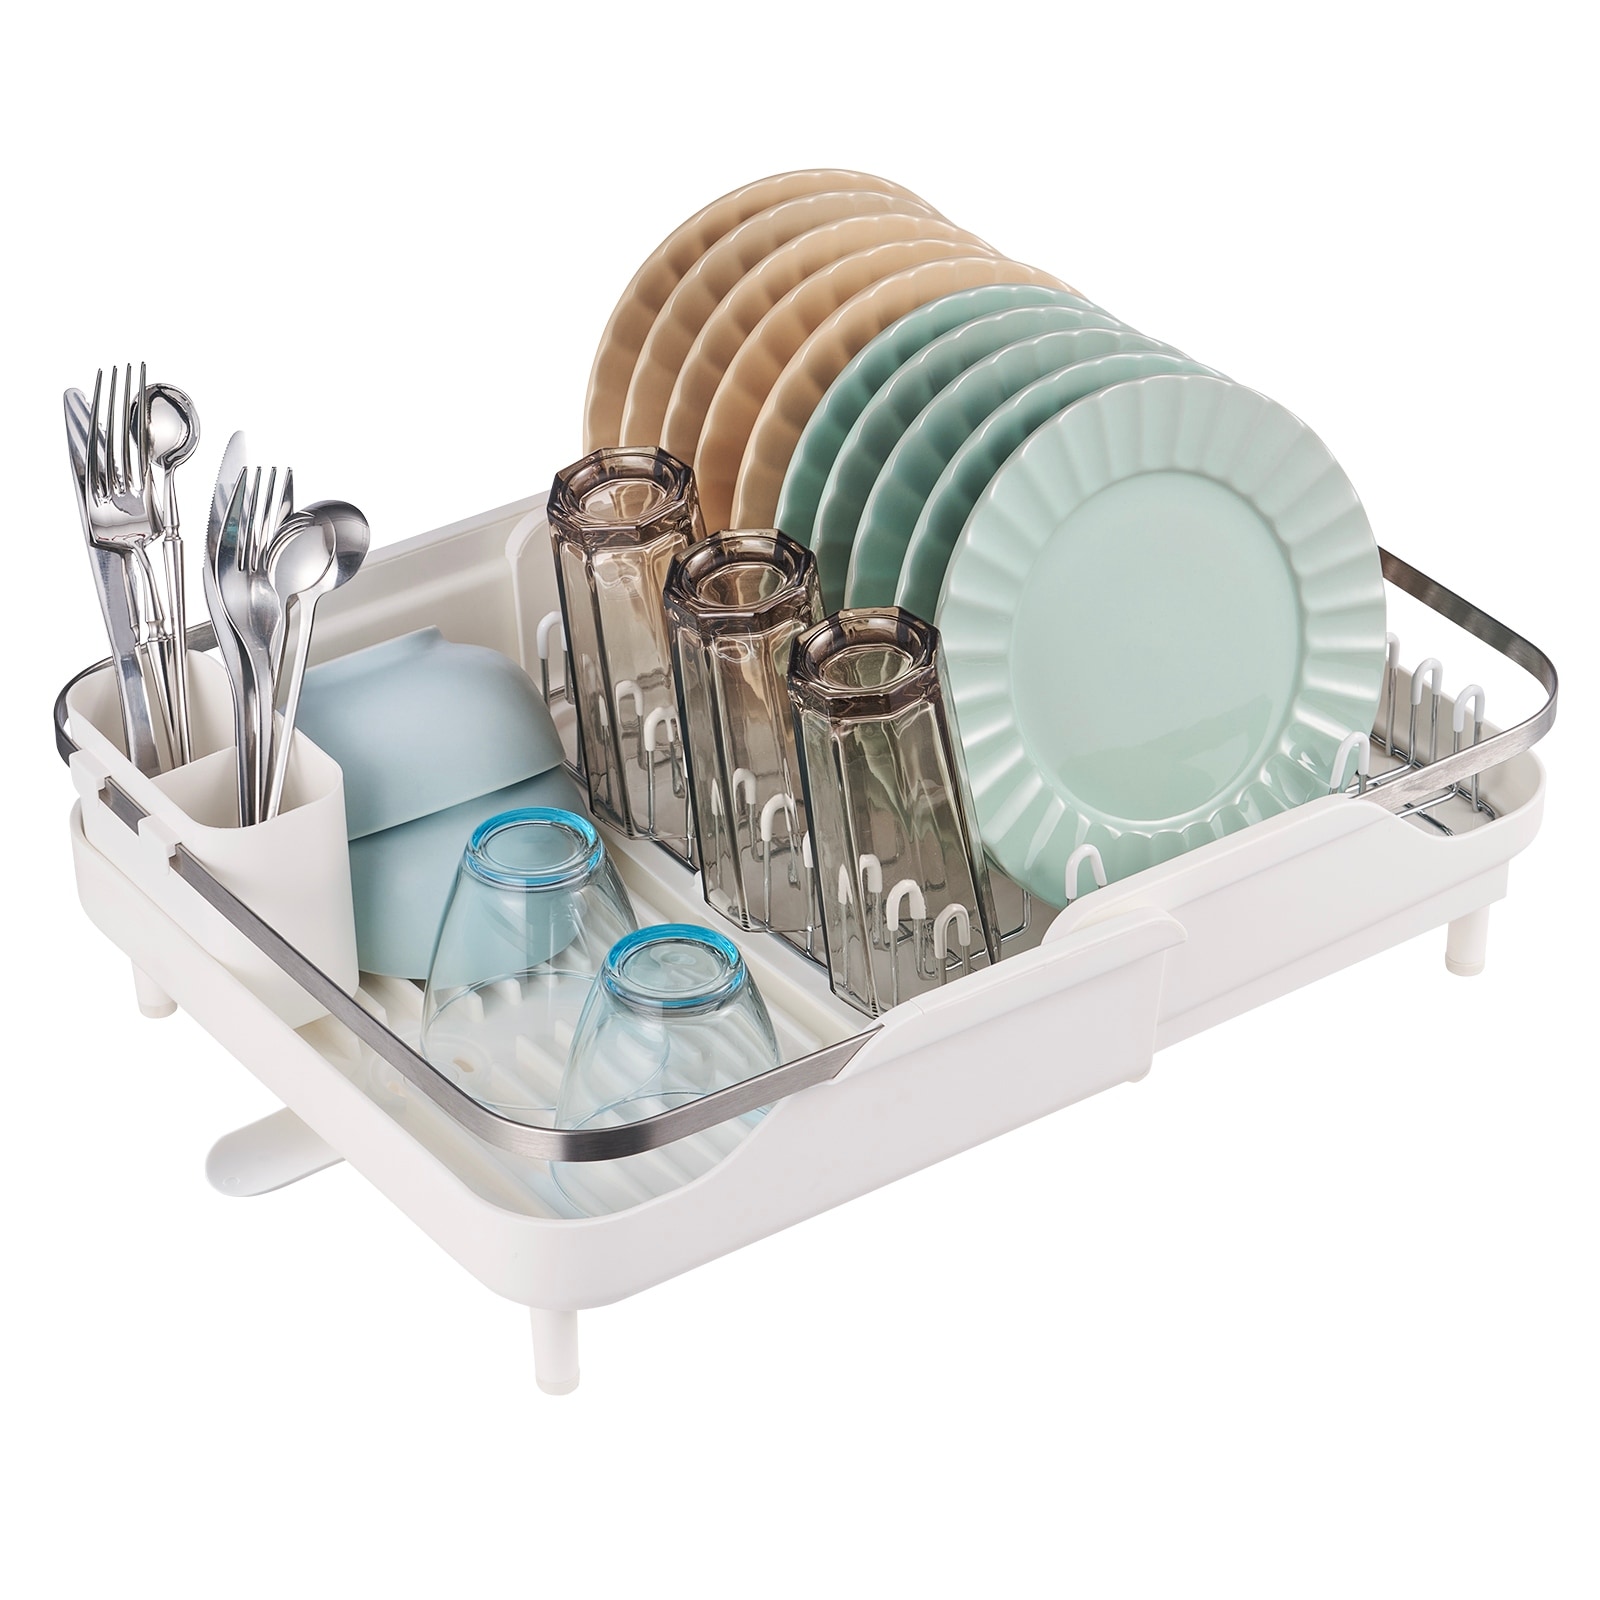 https://ak1.ostkcdn.com/images/products/is/images/direct/13a4dacf86d1625fba4a7618aa62a53e56194fa7/VEVOR-Large-Capacity-Dish-Drying-Rack-Stainless-Steel-Over-The-Sink-Single-Tier-Cup-and-Utensil-Holder.jpg